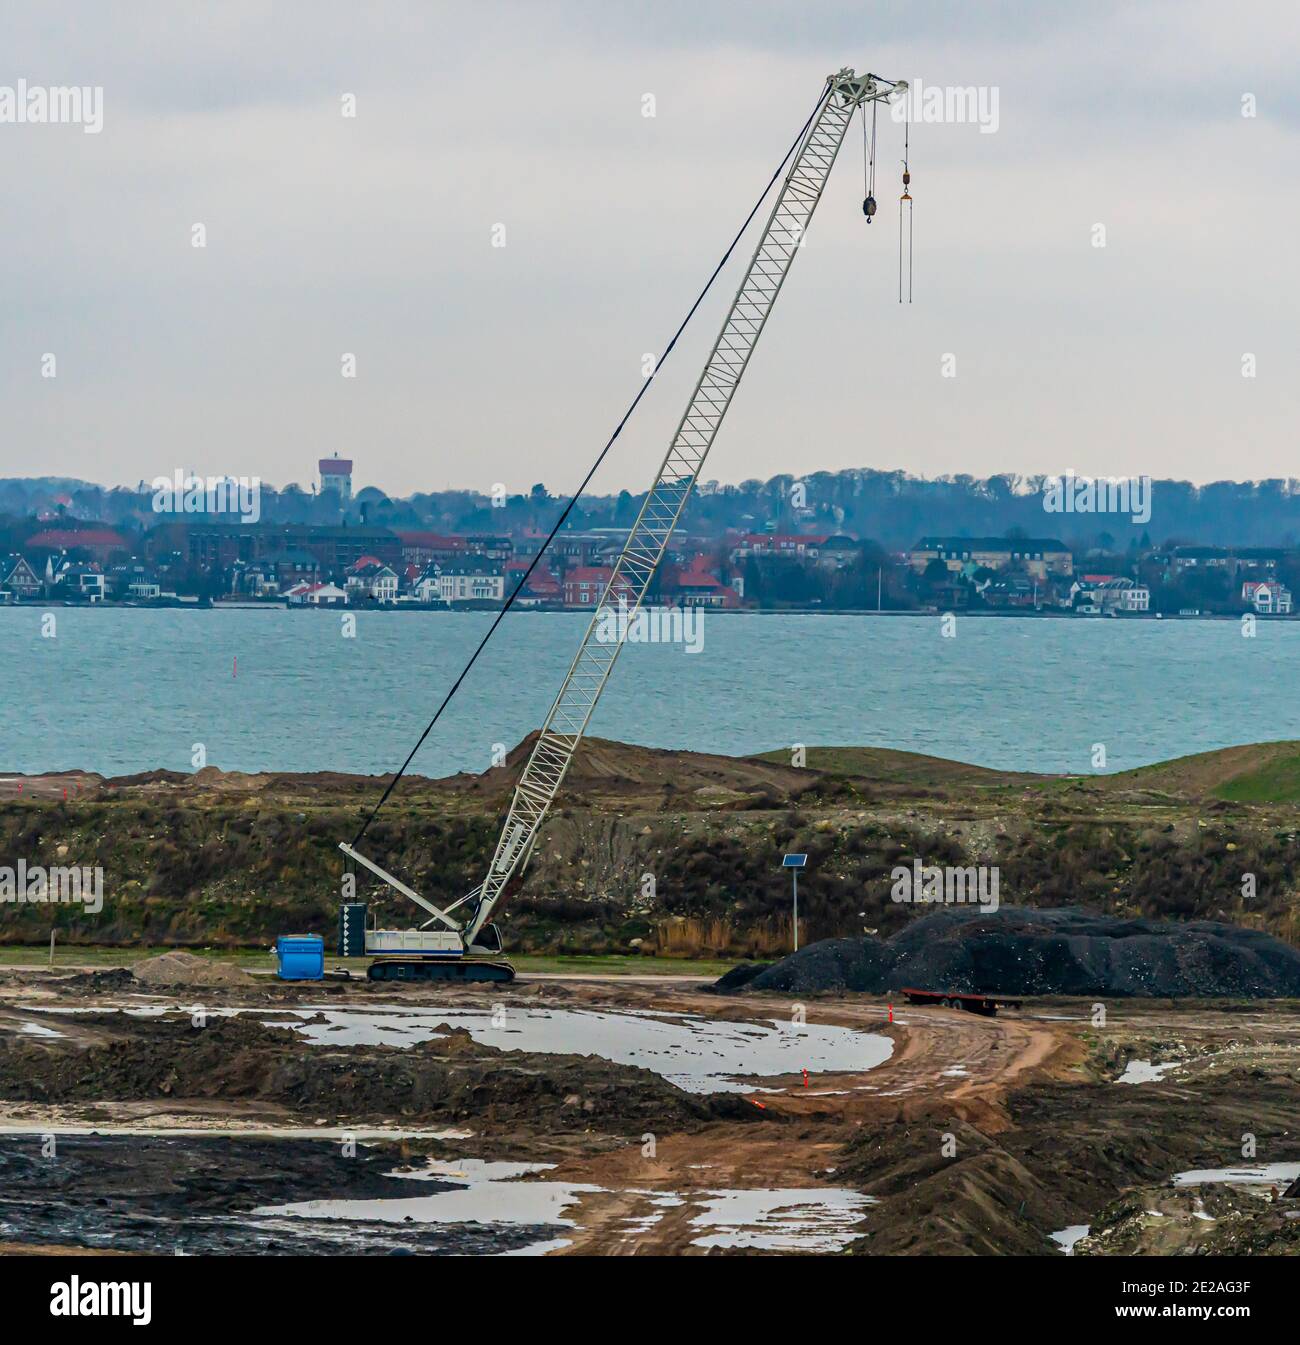 Large industrial construction crane at a work site near the sea. Stock Photo